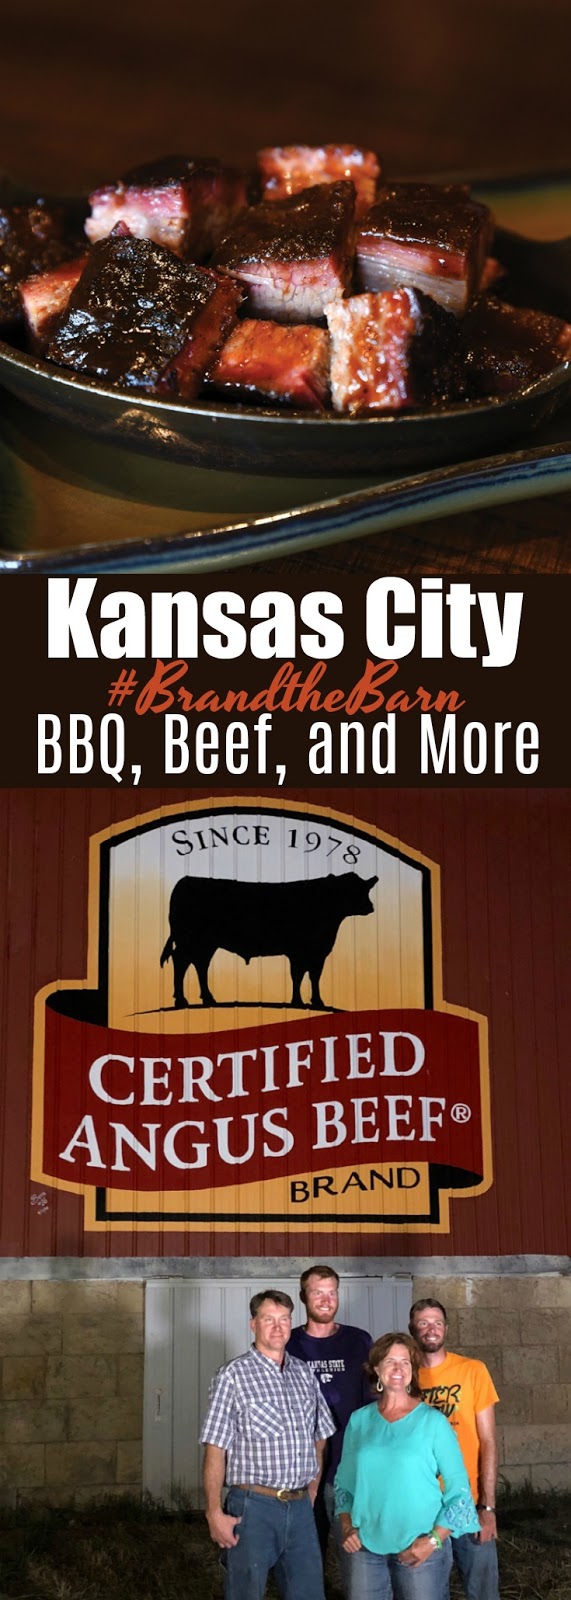 My trip to The Blythe Family Farm, and the Tiffany Cattle Co. in Kansas with Certified Angus Beef ® brand. #brandthebarn #bestangusbeef #certifiedangusbeef #kansascity #BBQ #beef #travel | www.bobbiskozykitchen.com